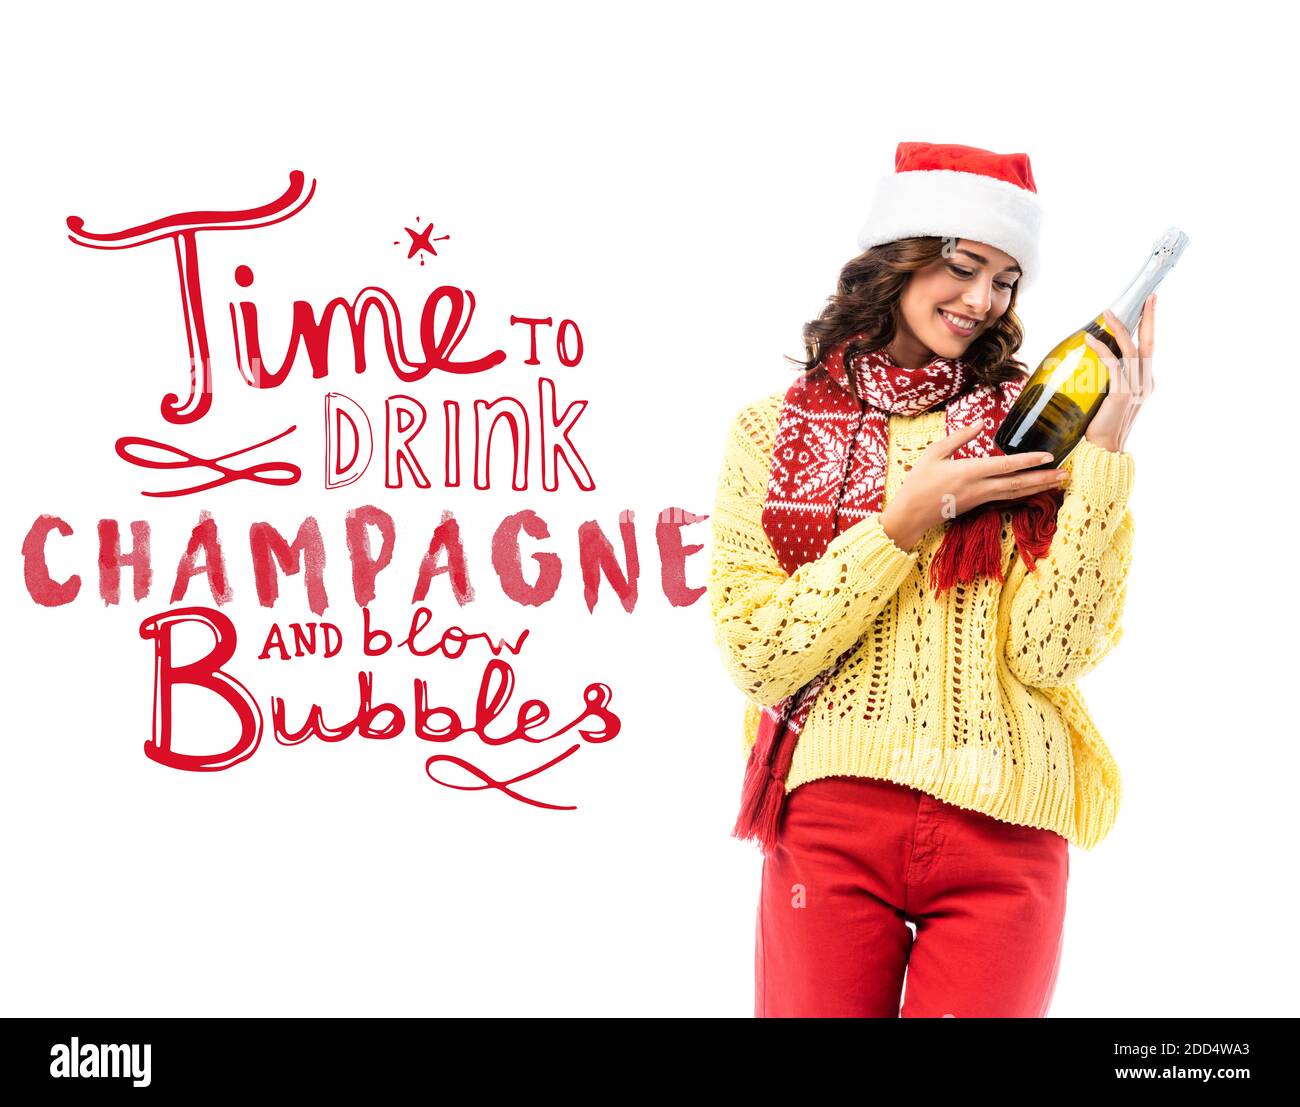 joyful young woman in santa hat looking at bottle of champagne near time to drink champagne and blow bubbles lettering on white Stock Photo